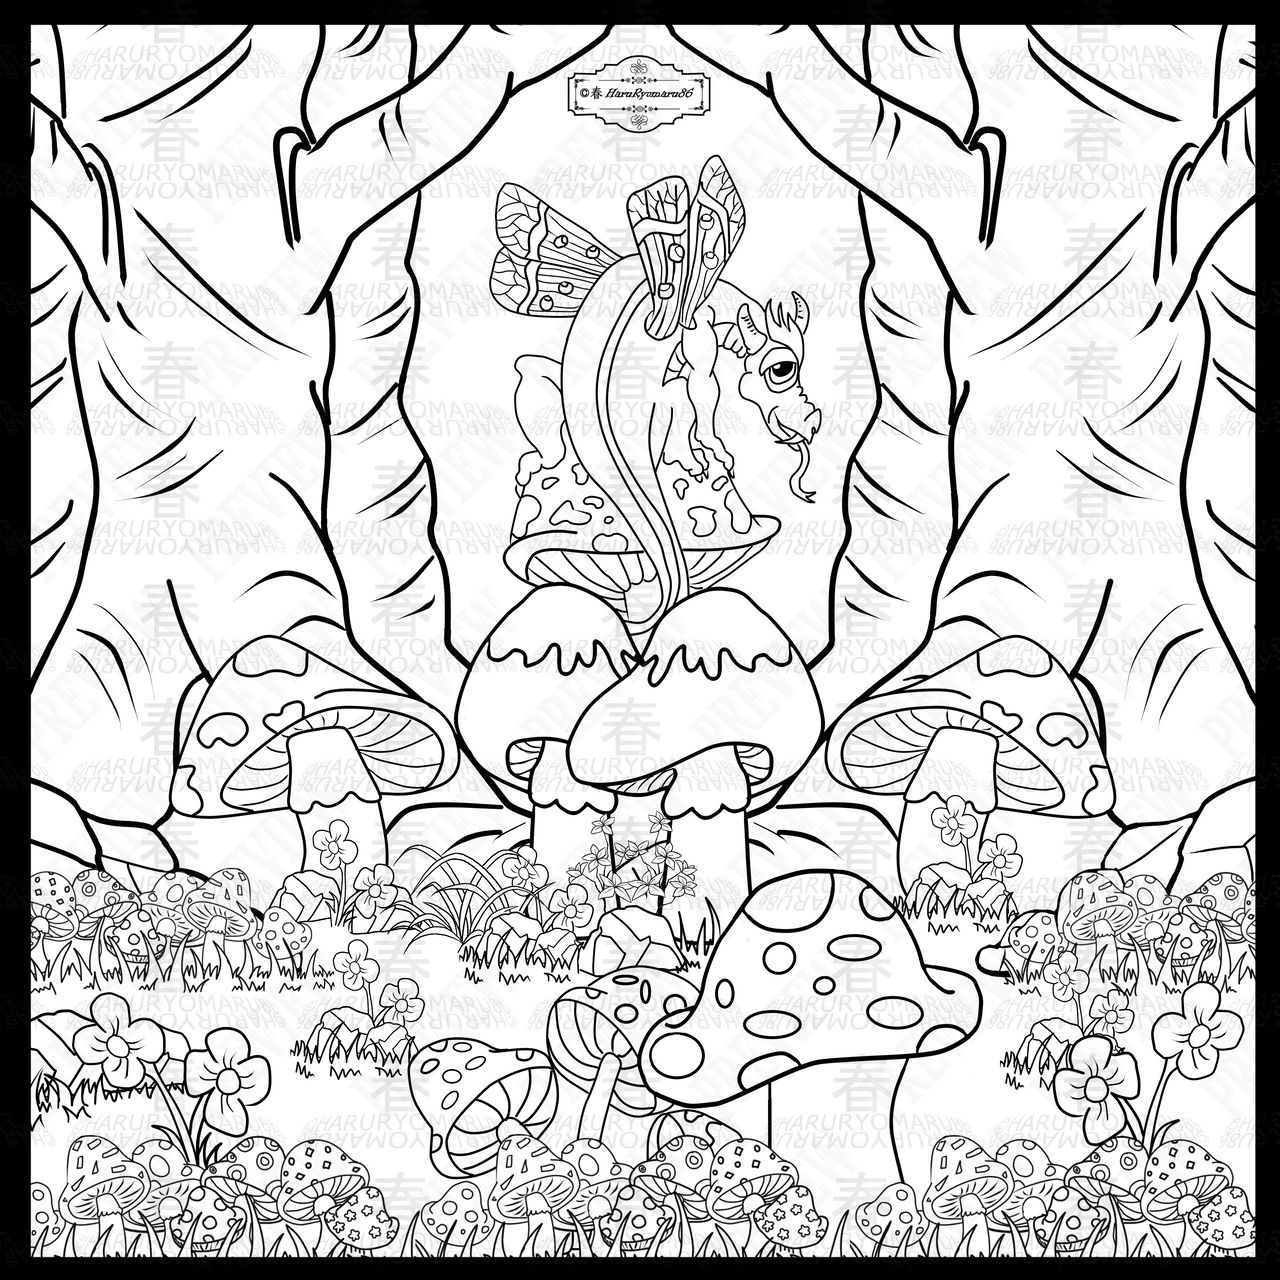 Enchanted forest colouring page preview by haruryomaru on